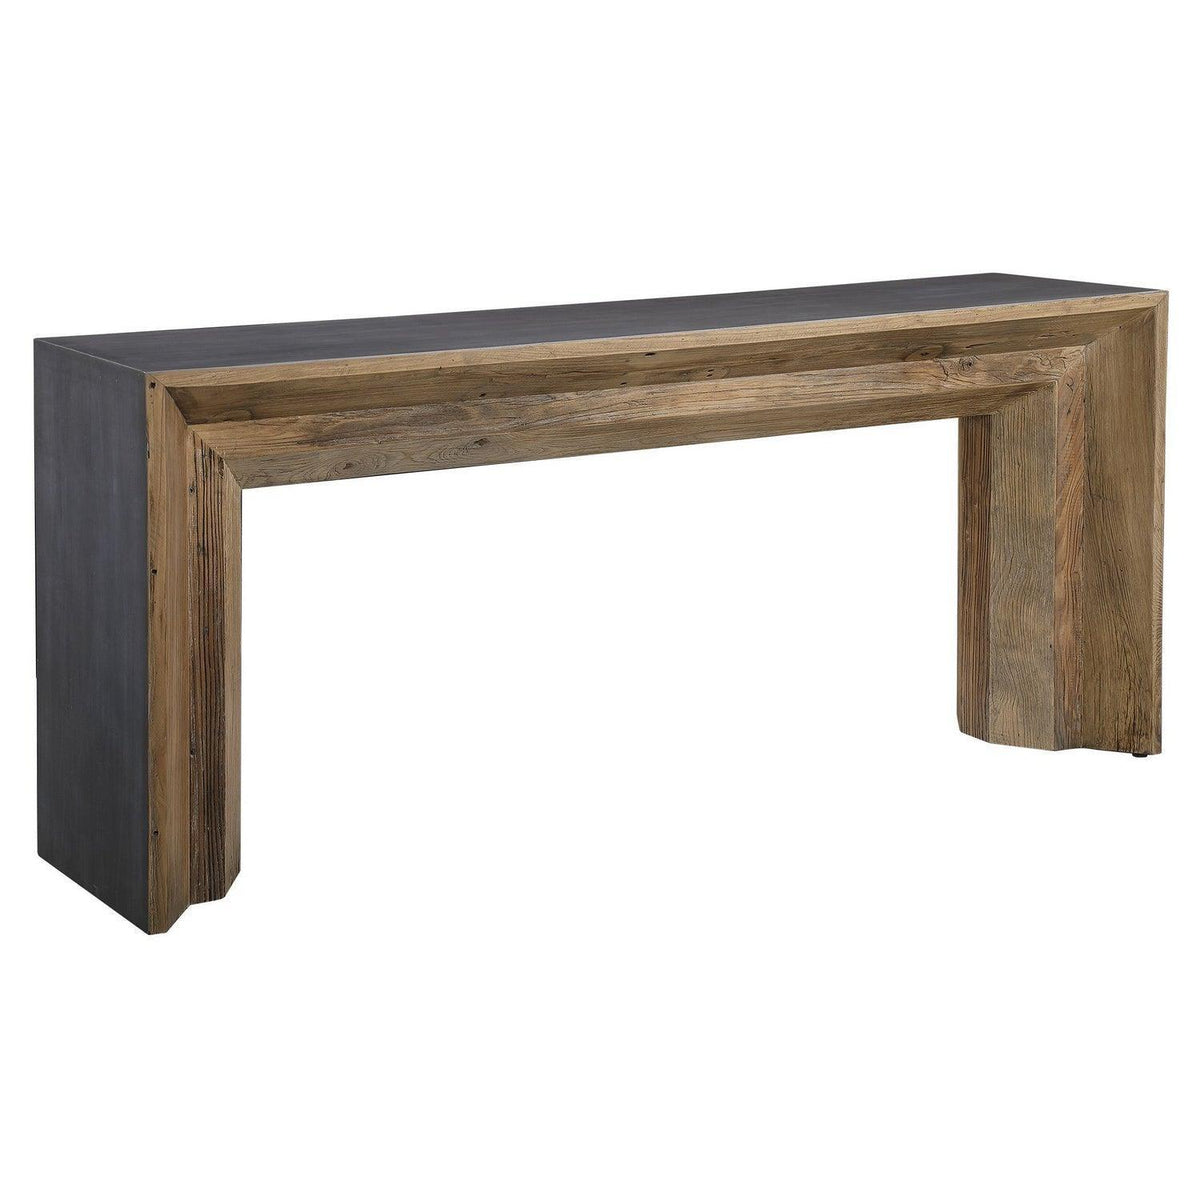 The Uttermost - Vail Console Table - 24987 | Montreal Lighting & Hardware